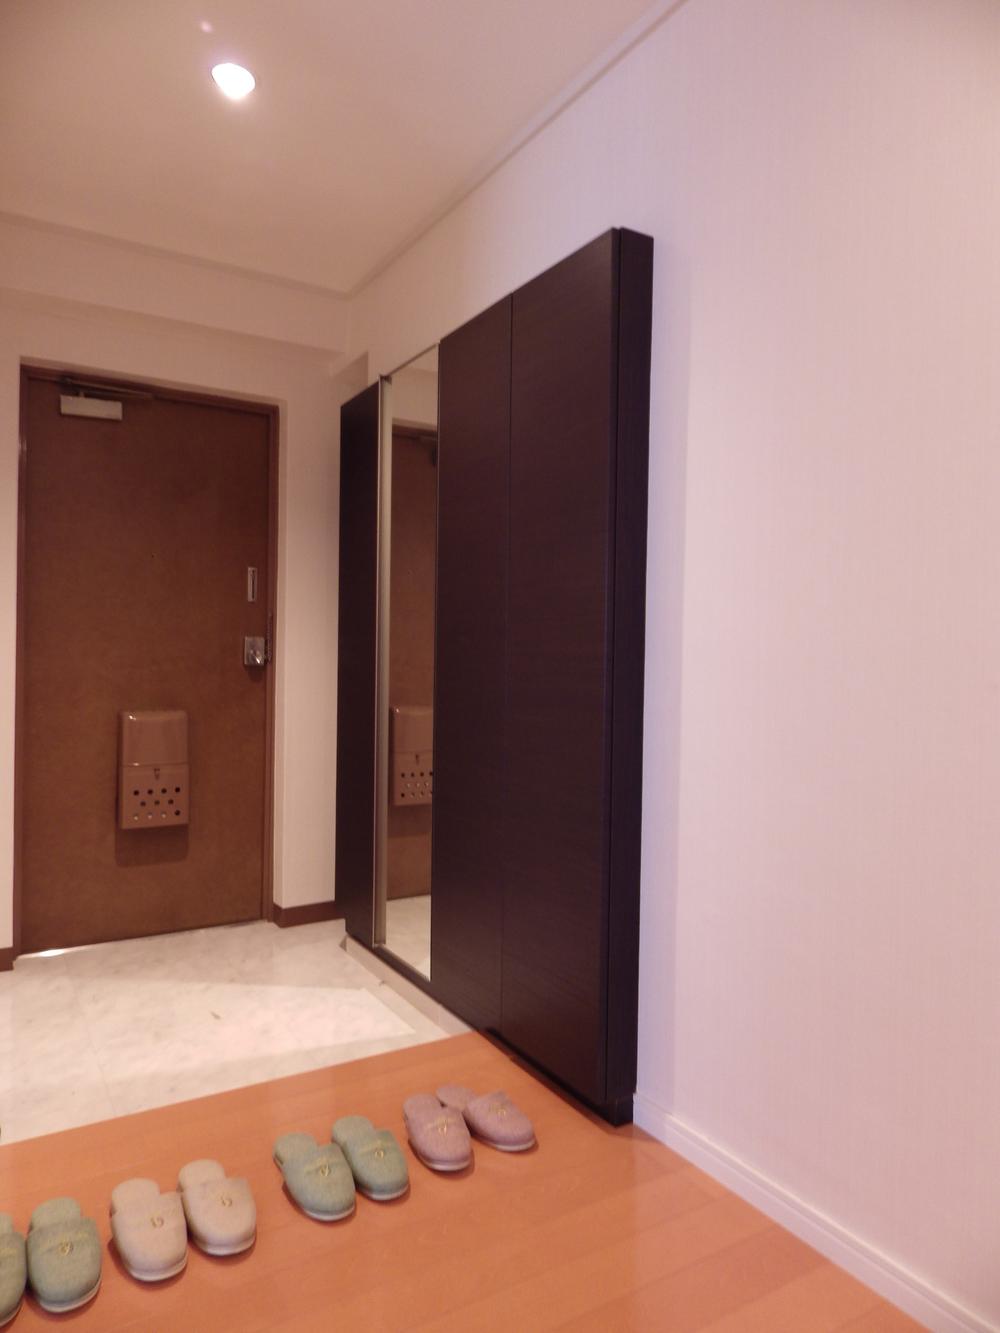 Entrance. Entrance is also a widely storage capacity with shoes BOX